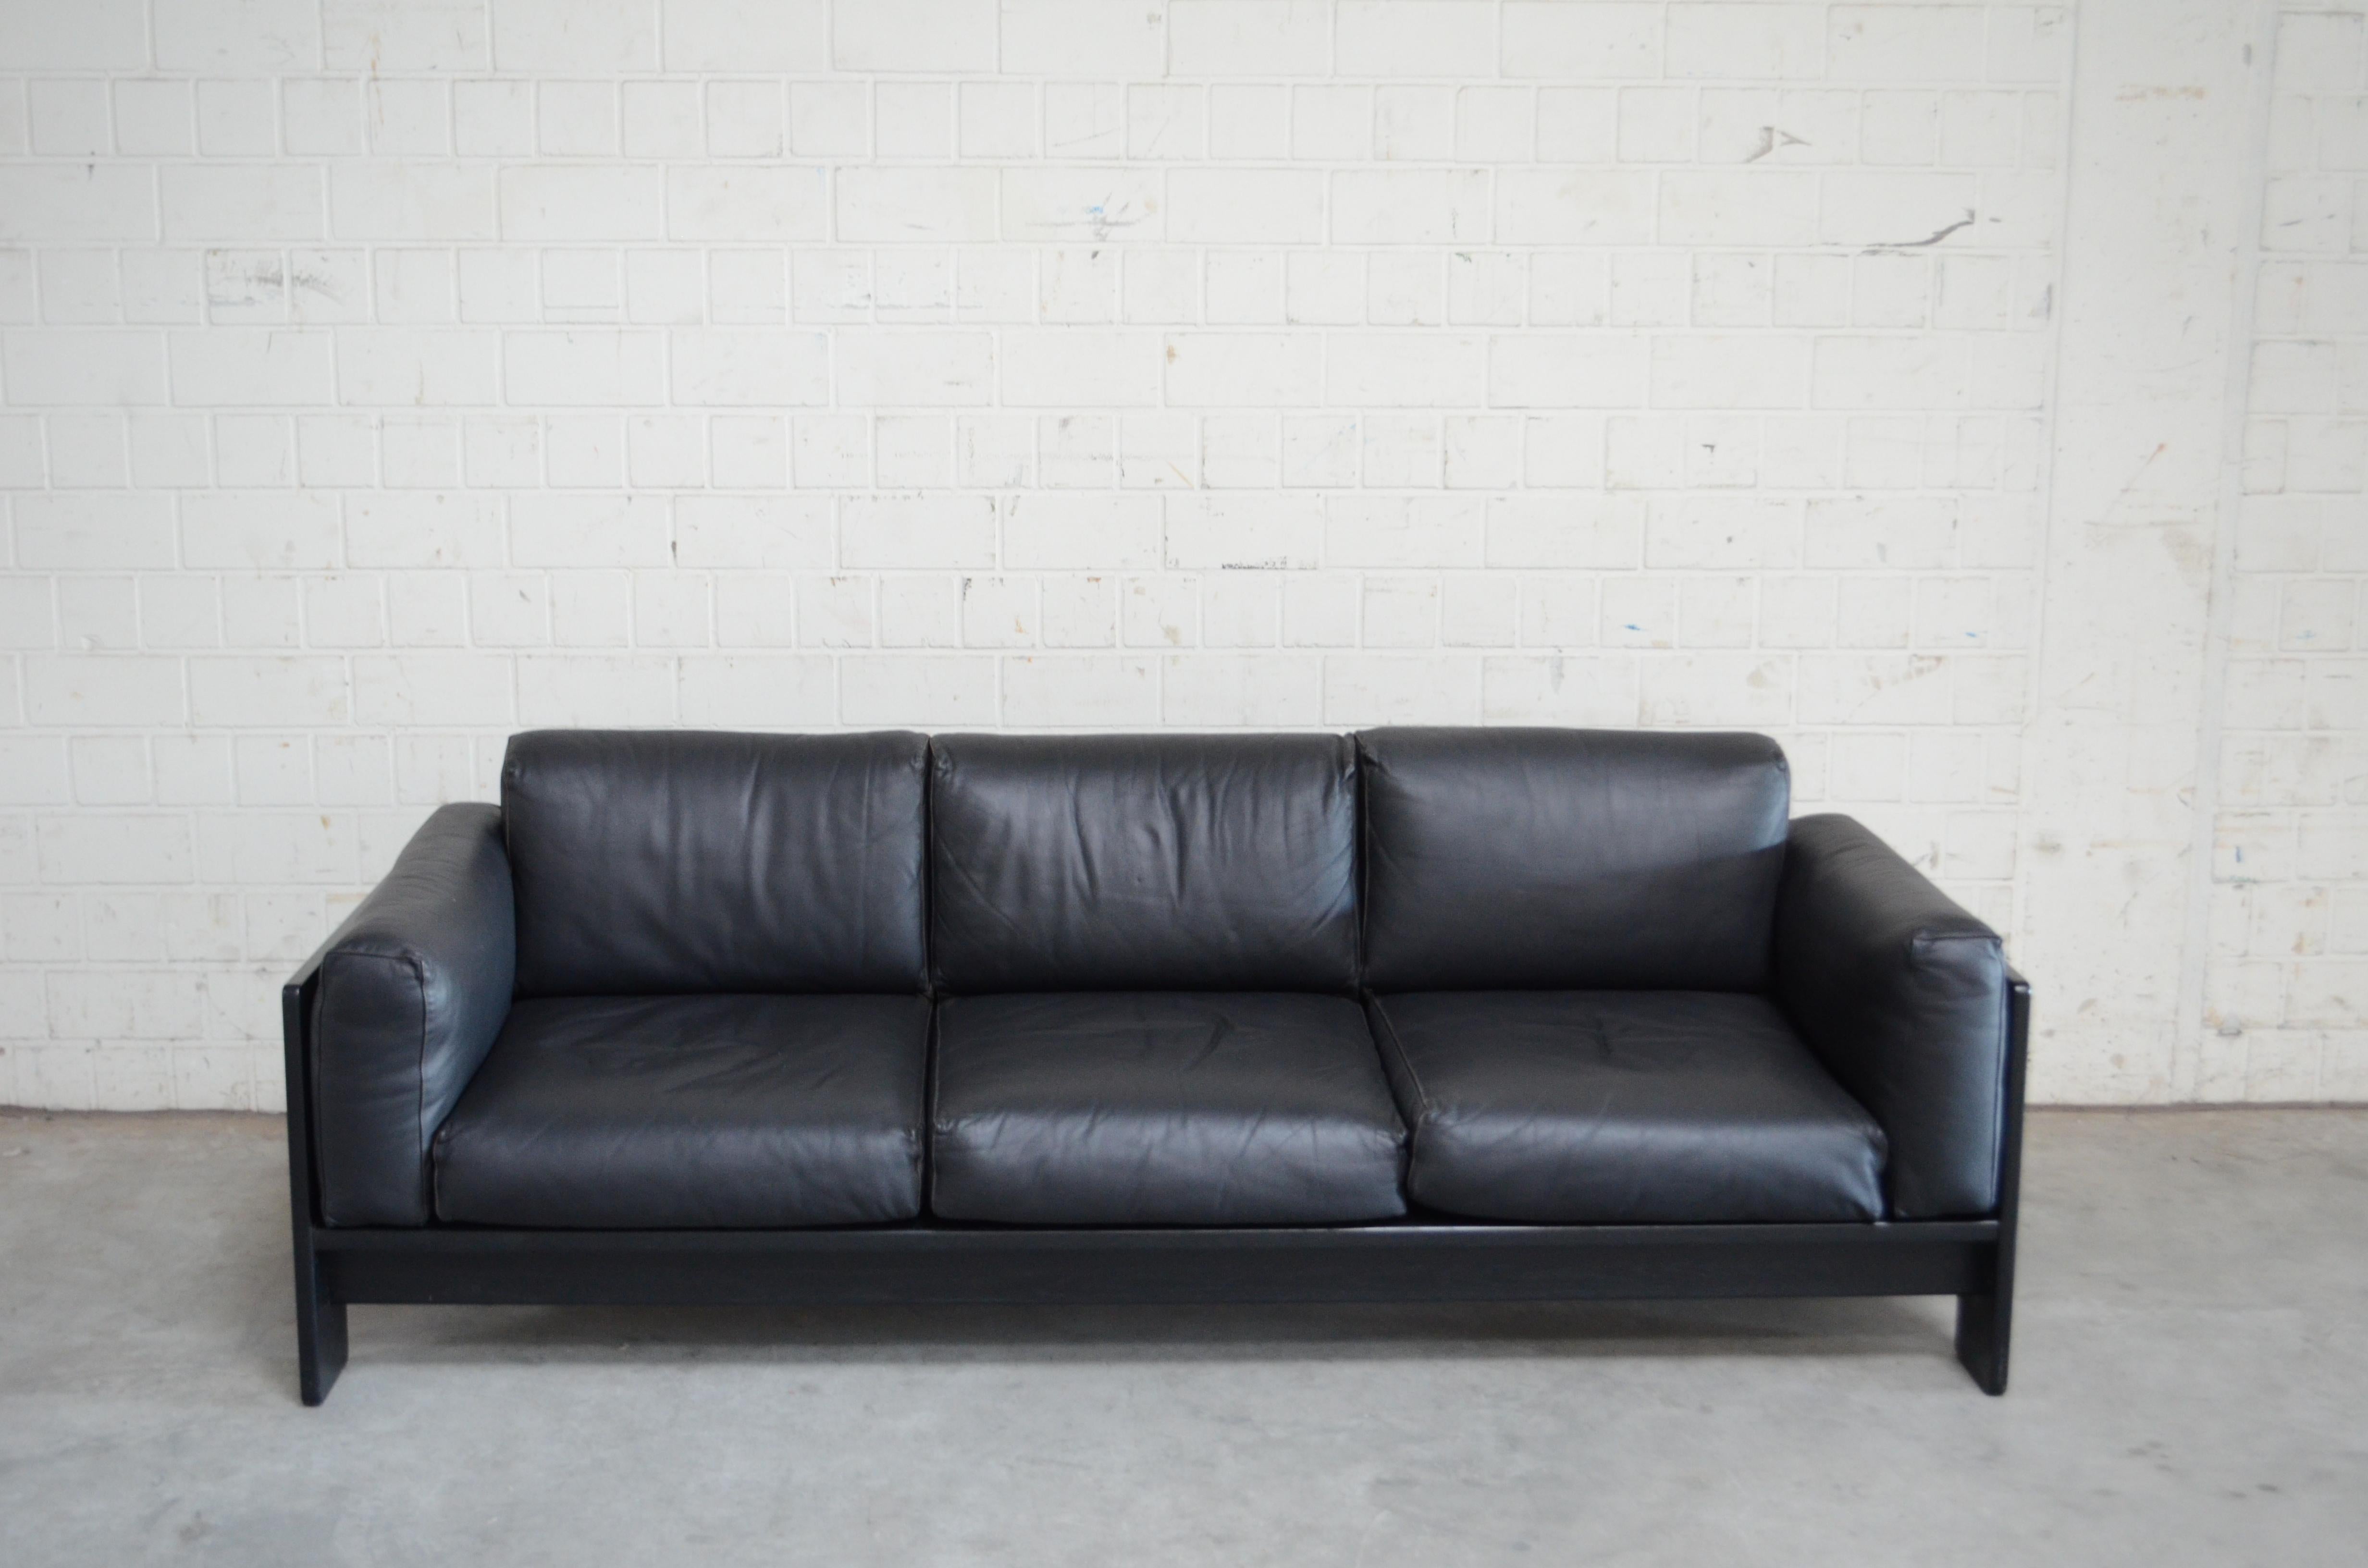 Bastiano leather sofa in black Semianiline leather.
Made by original producer Gavina in 1968.
It has a black lacquered woodframe.
In mint condition.